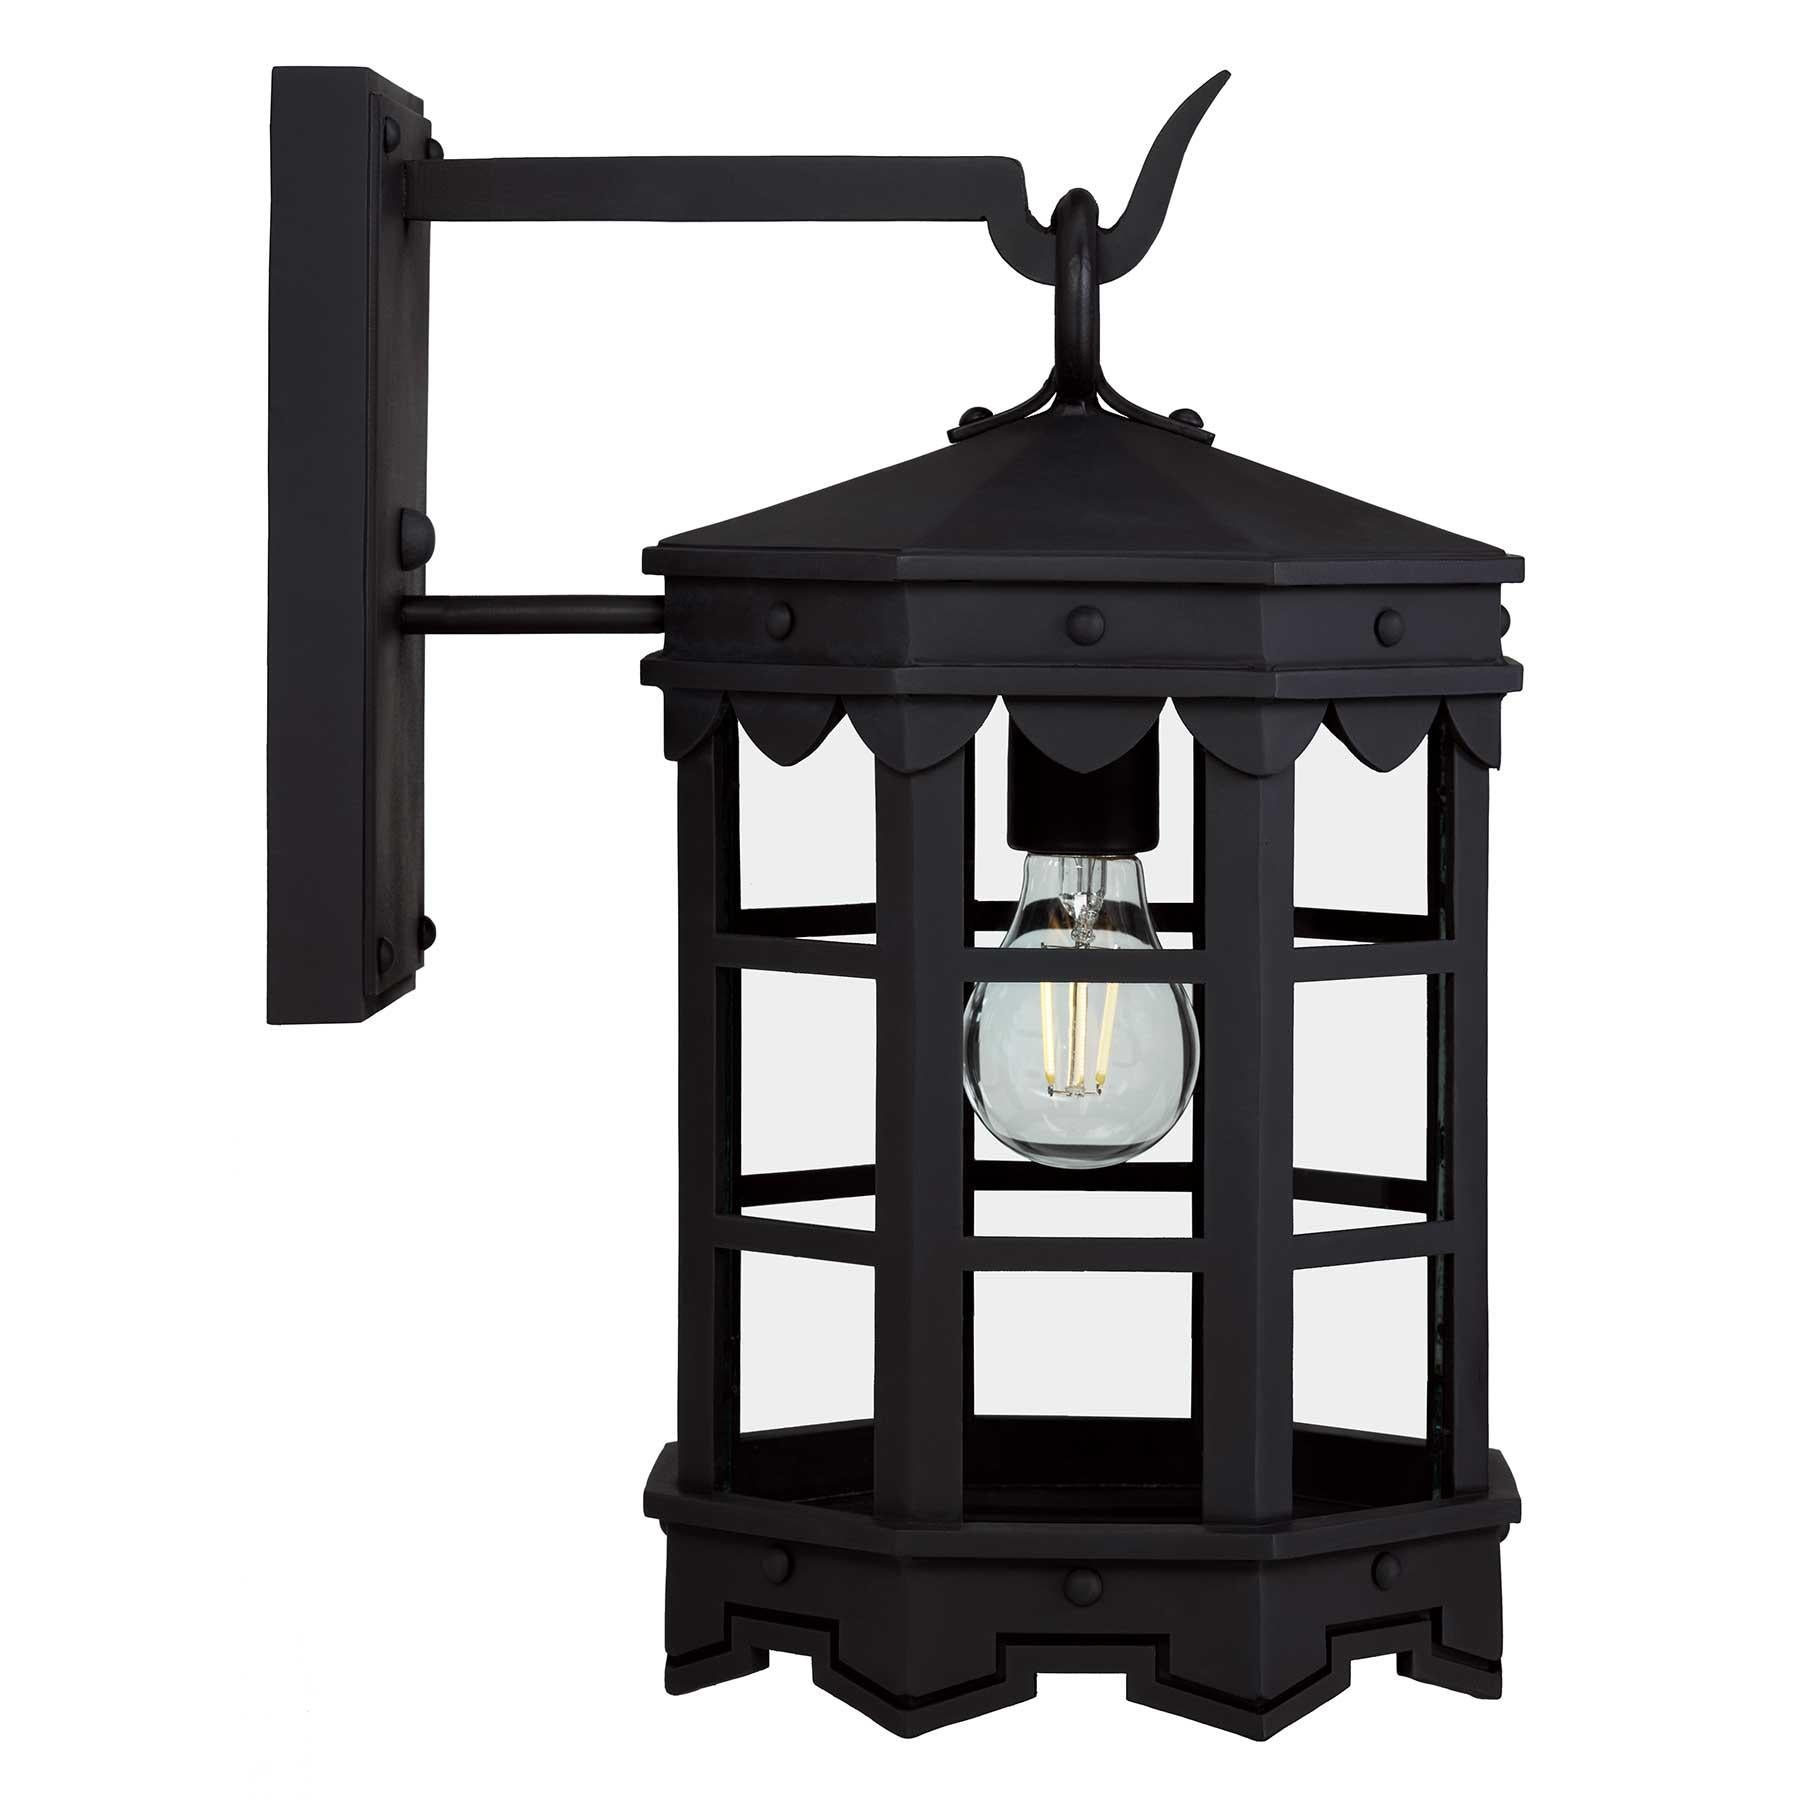 Our De La Guerra lantern finished in our SBLC Black Finish has Mediterranean and Spanish Colonial style precedence with historic profiles and contemporary geometric lines. This fixture is a stunning blend of Old World elegance and contemporary